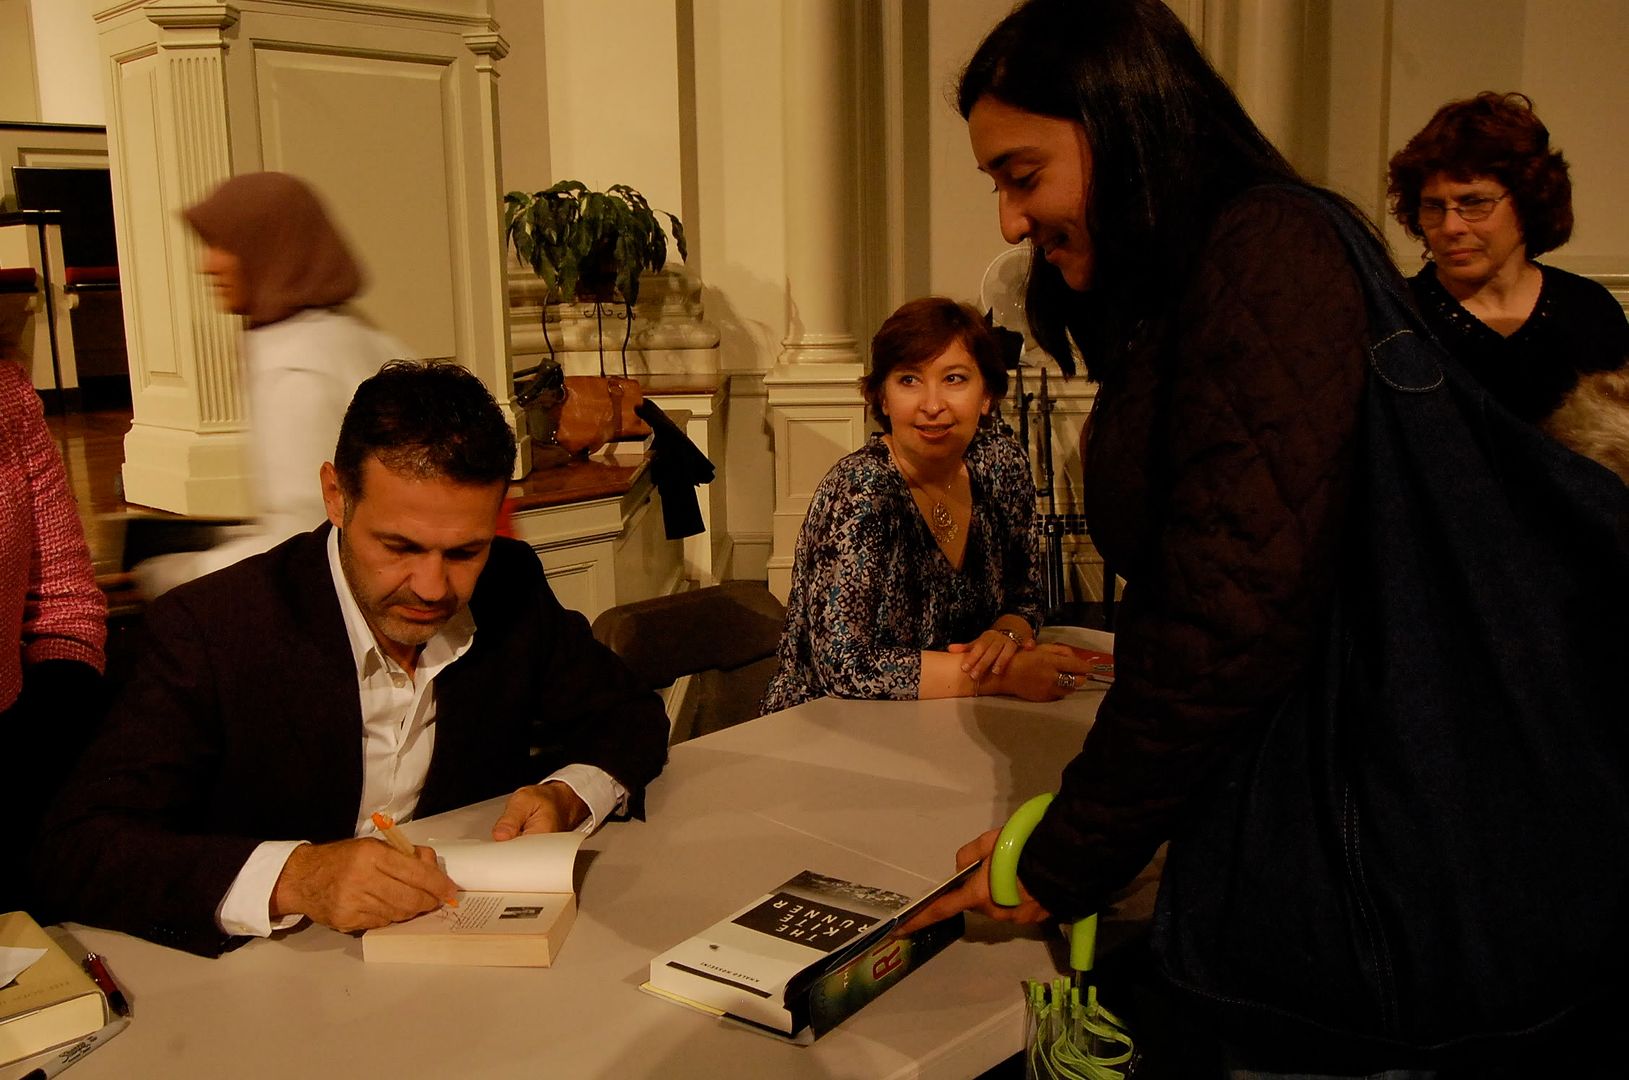 Khaled Hosseini signing autographs after the lecture.